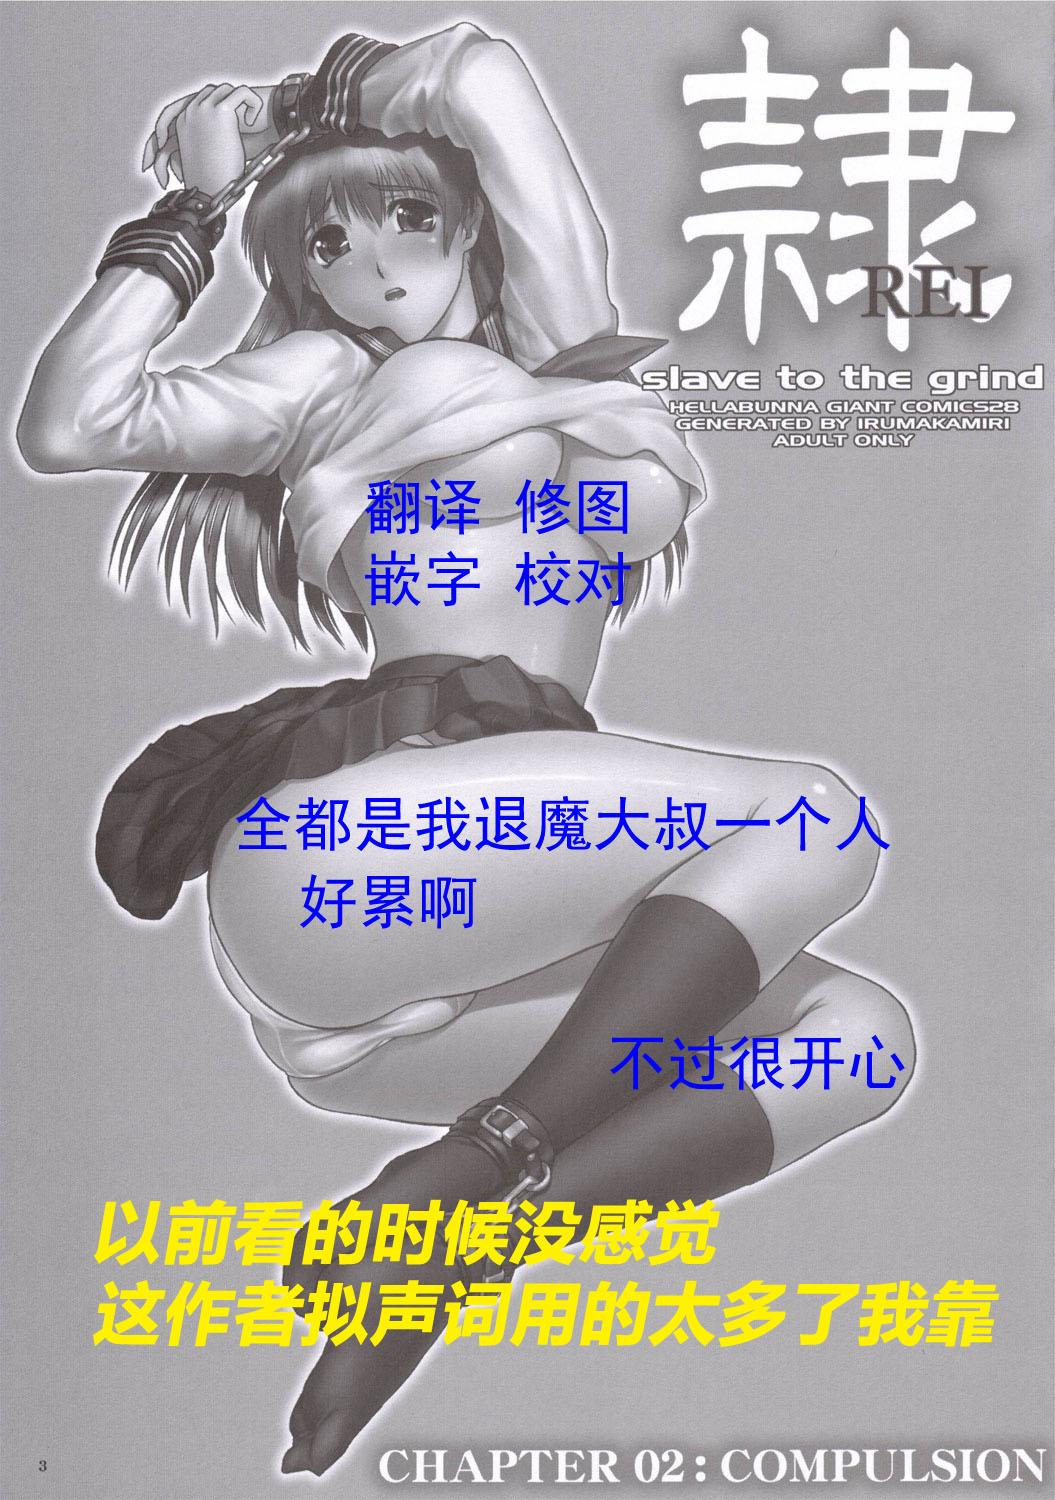 Sexteen (C69) [Hellabunna (Iruma Kamiri)] REI - slave to the grind - CHAPTER 02: COMPULSION (Dead or Alive) [Chinese] [退魔大叔个人汉化] - Dead or alive Tranny Sex - Page 3